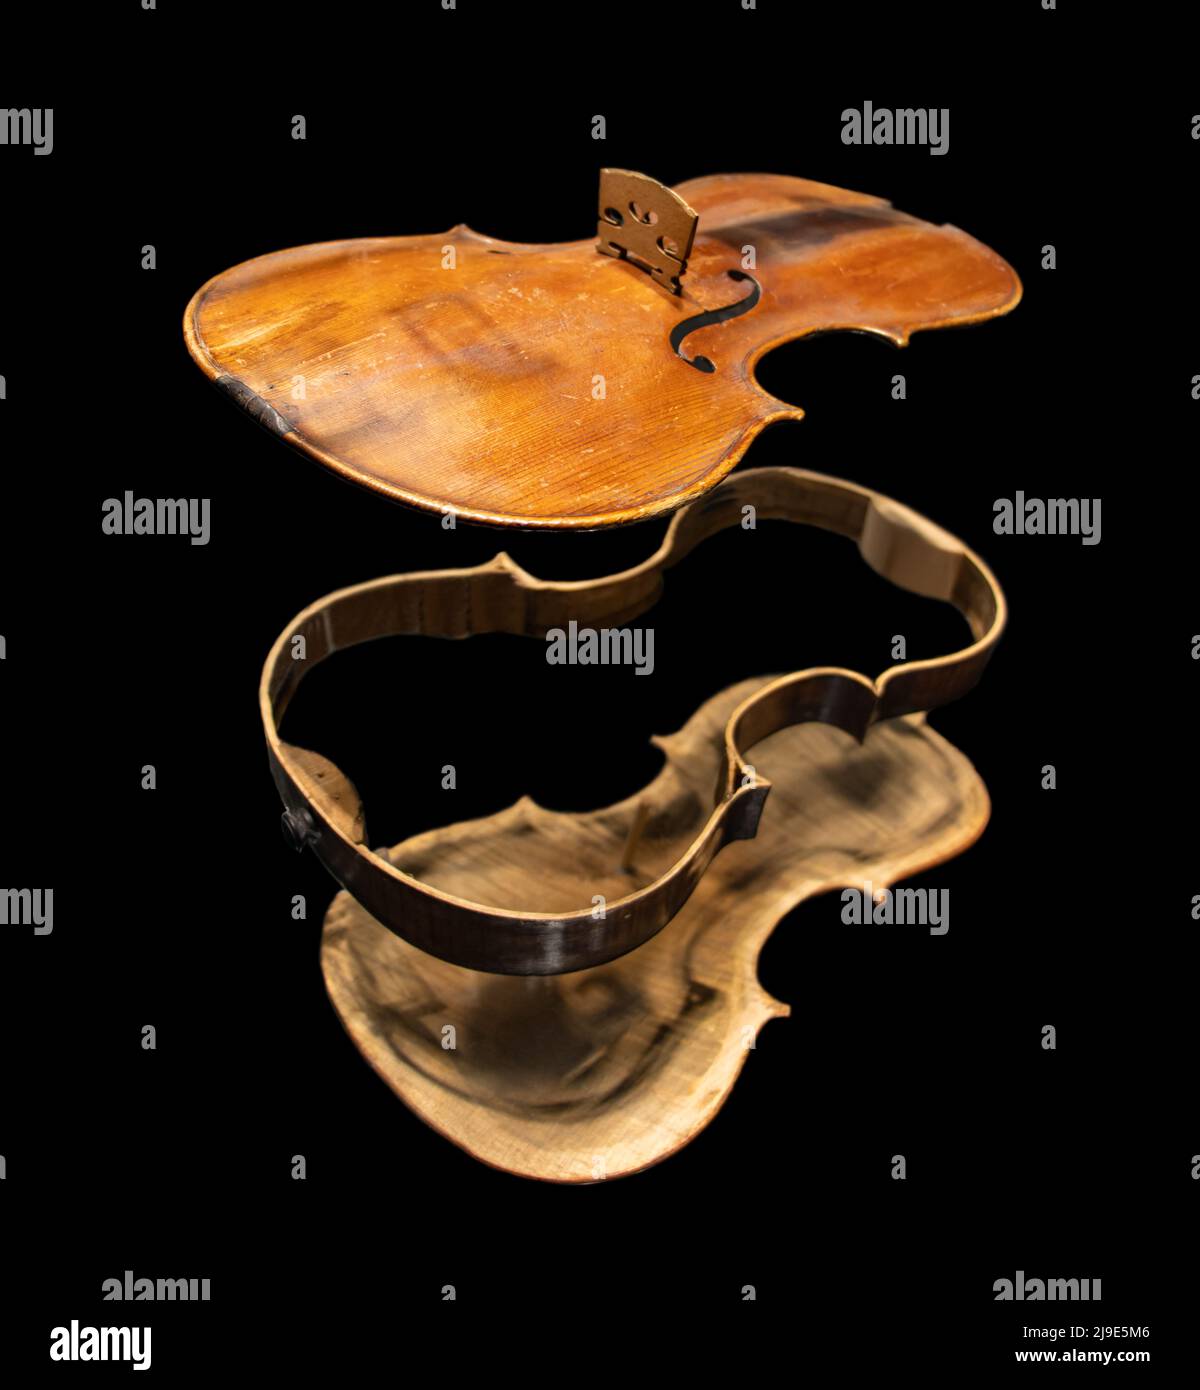 Violin demonted in a parts, on a black background Stock Photo